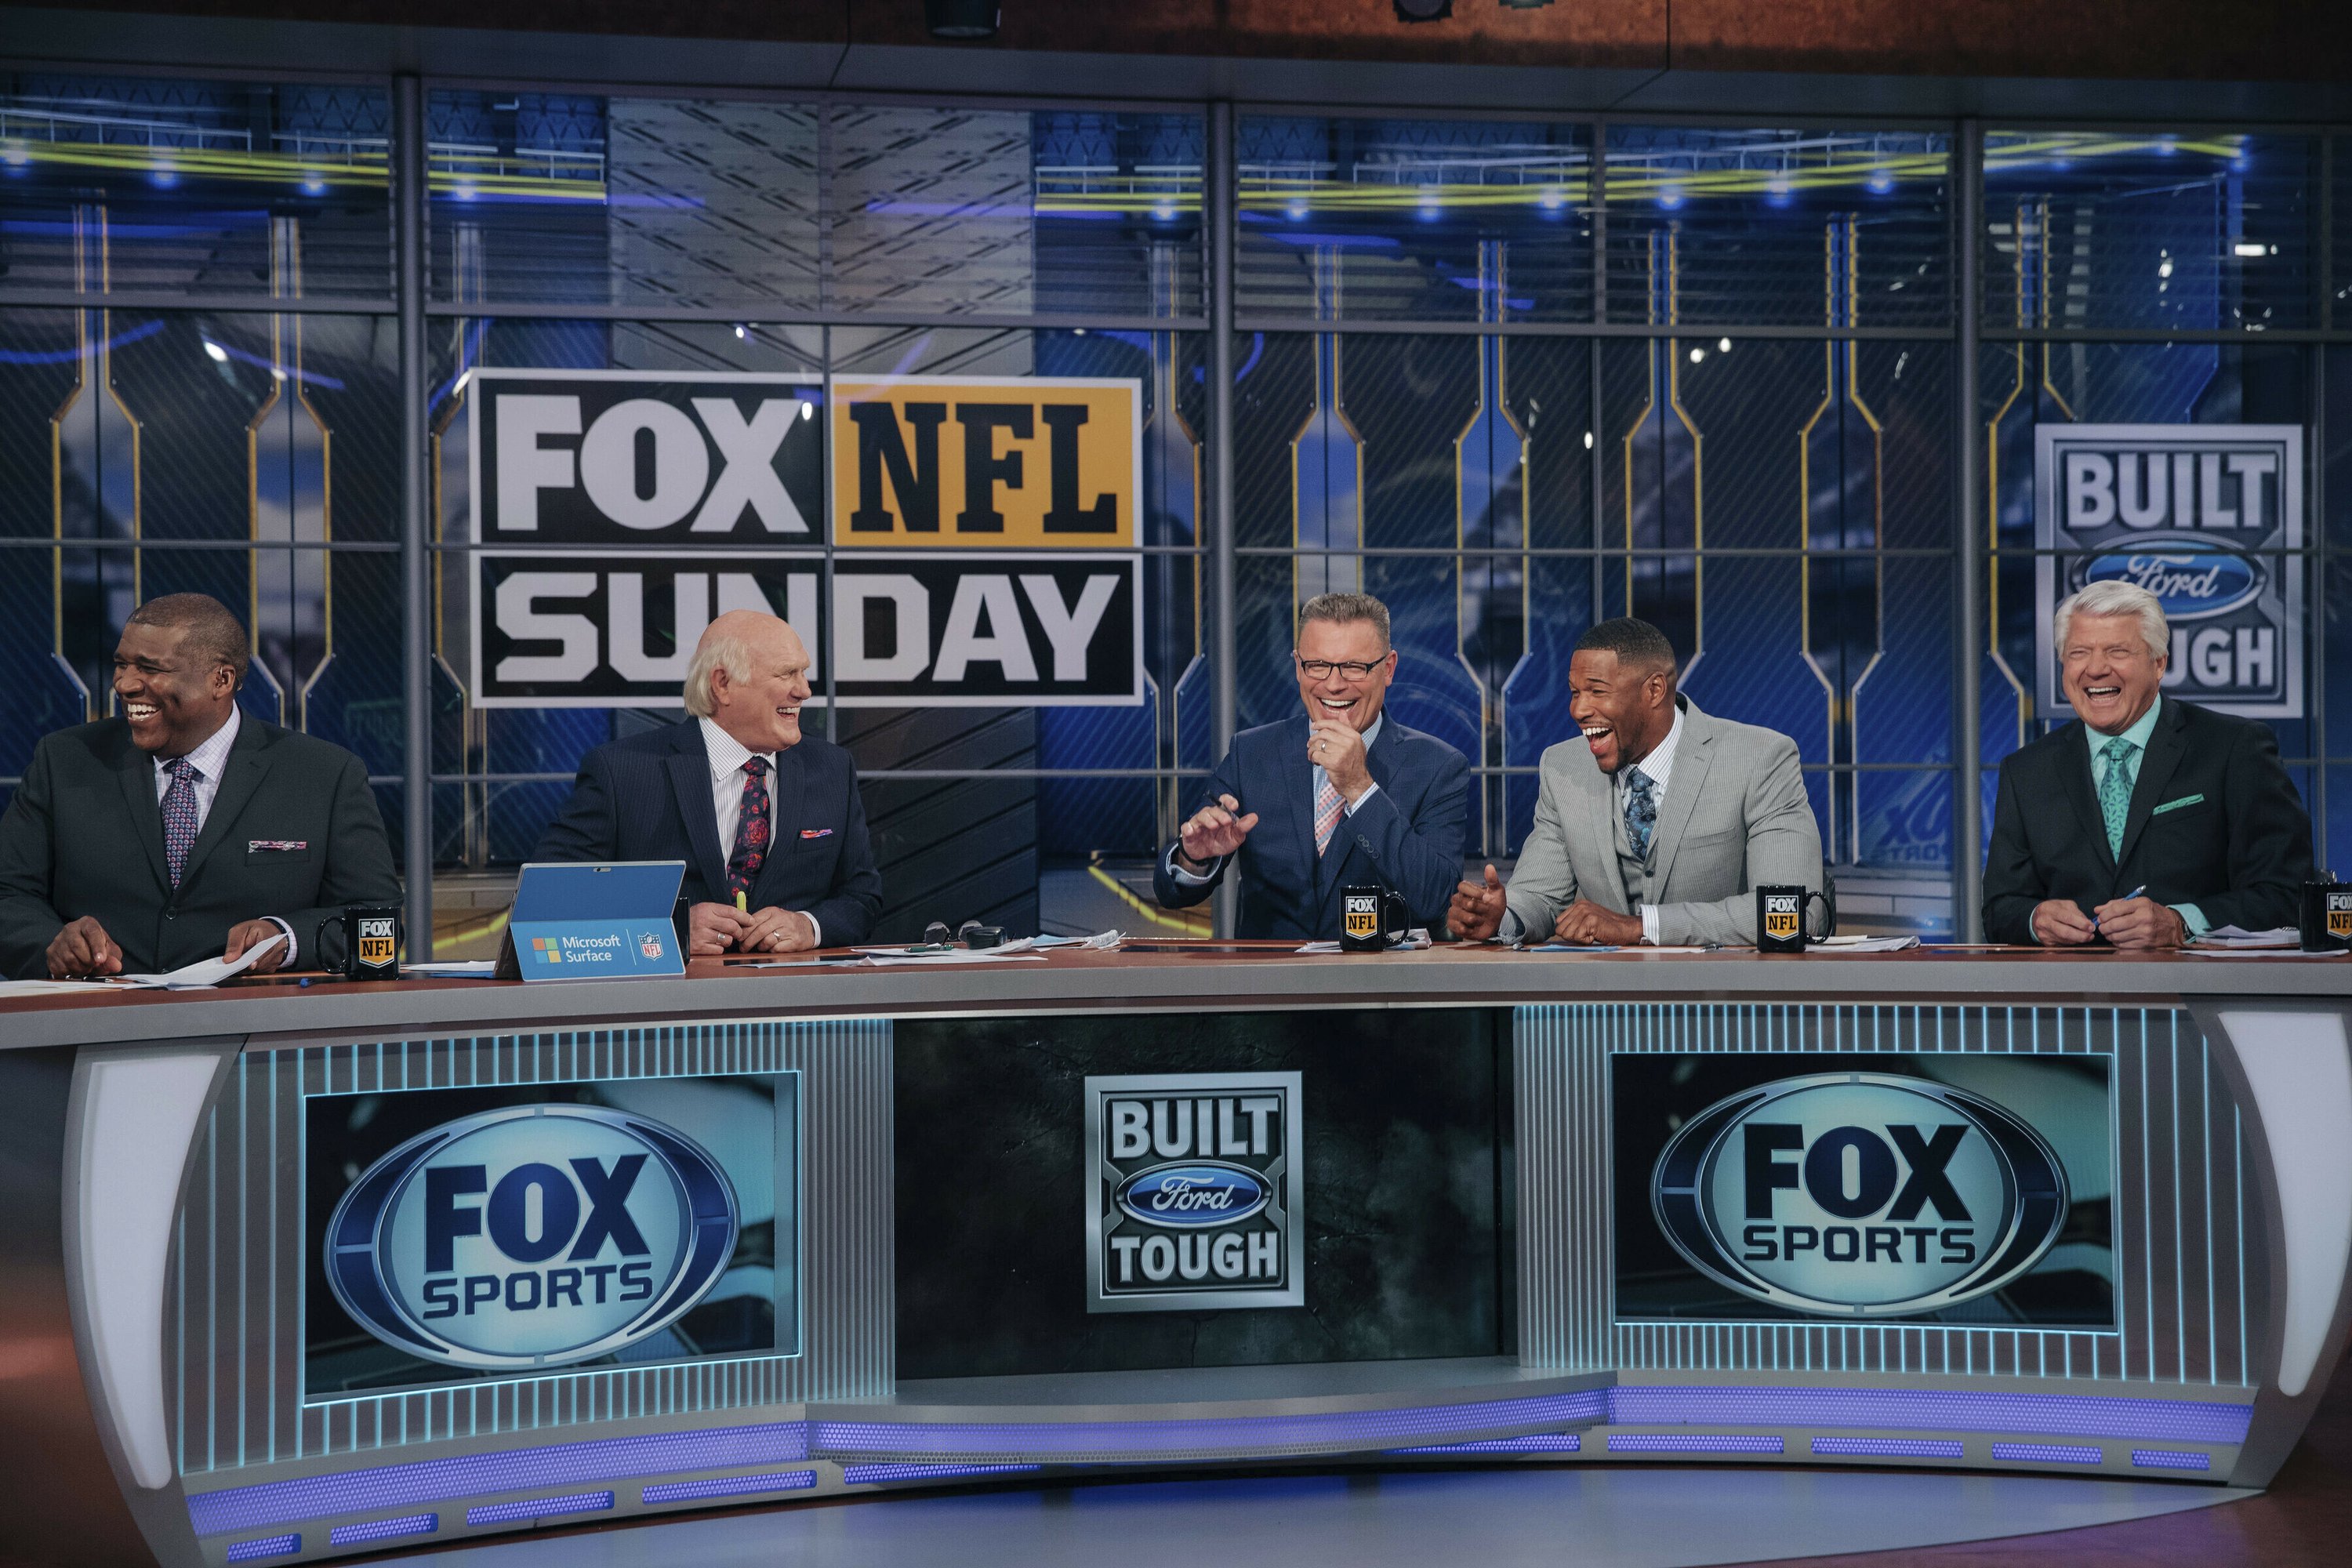 Foxs Nfl Pregame Show Takes Place In Broadcast Hall Of Fame